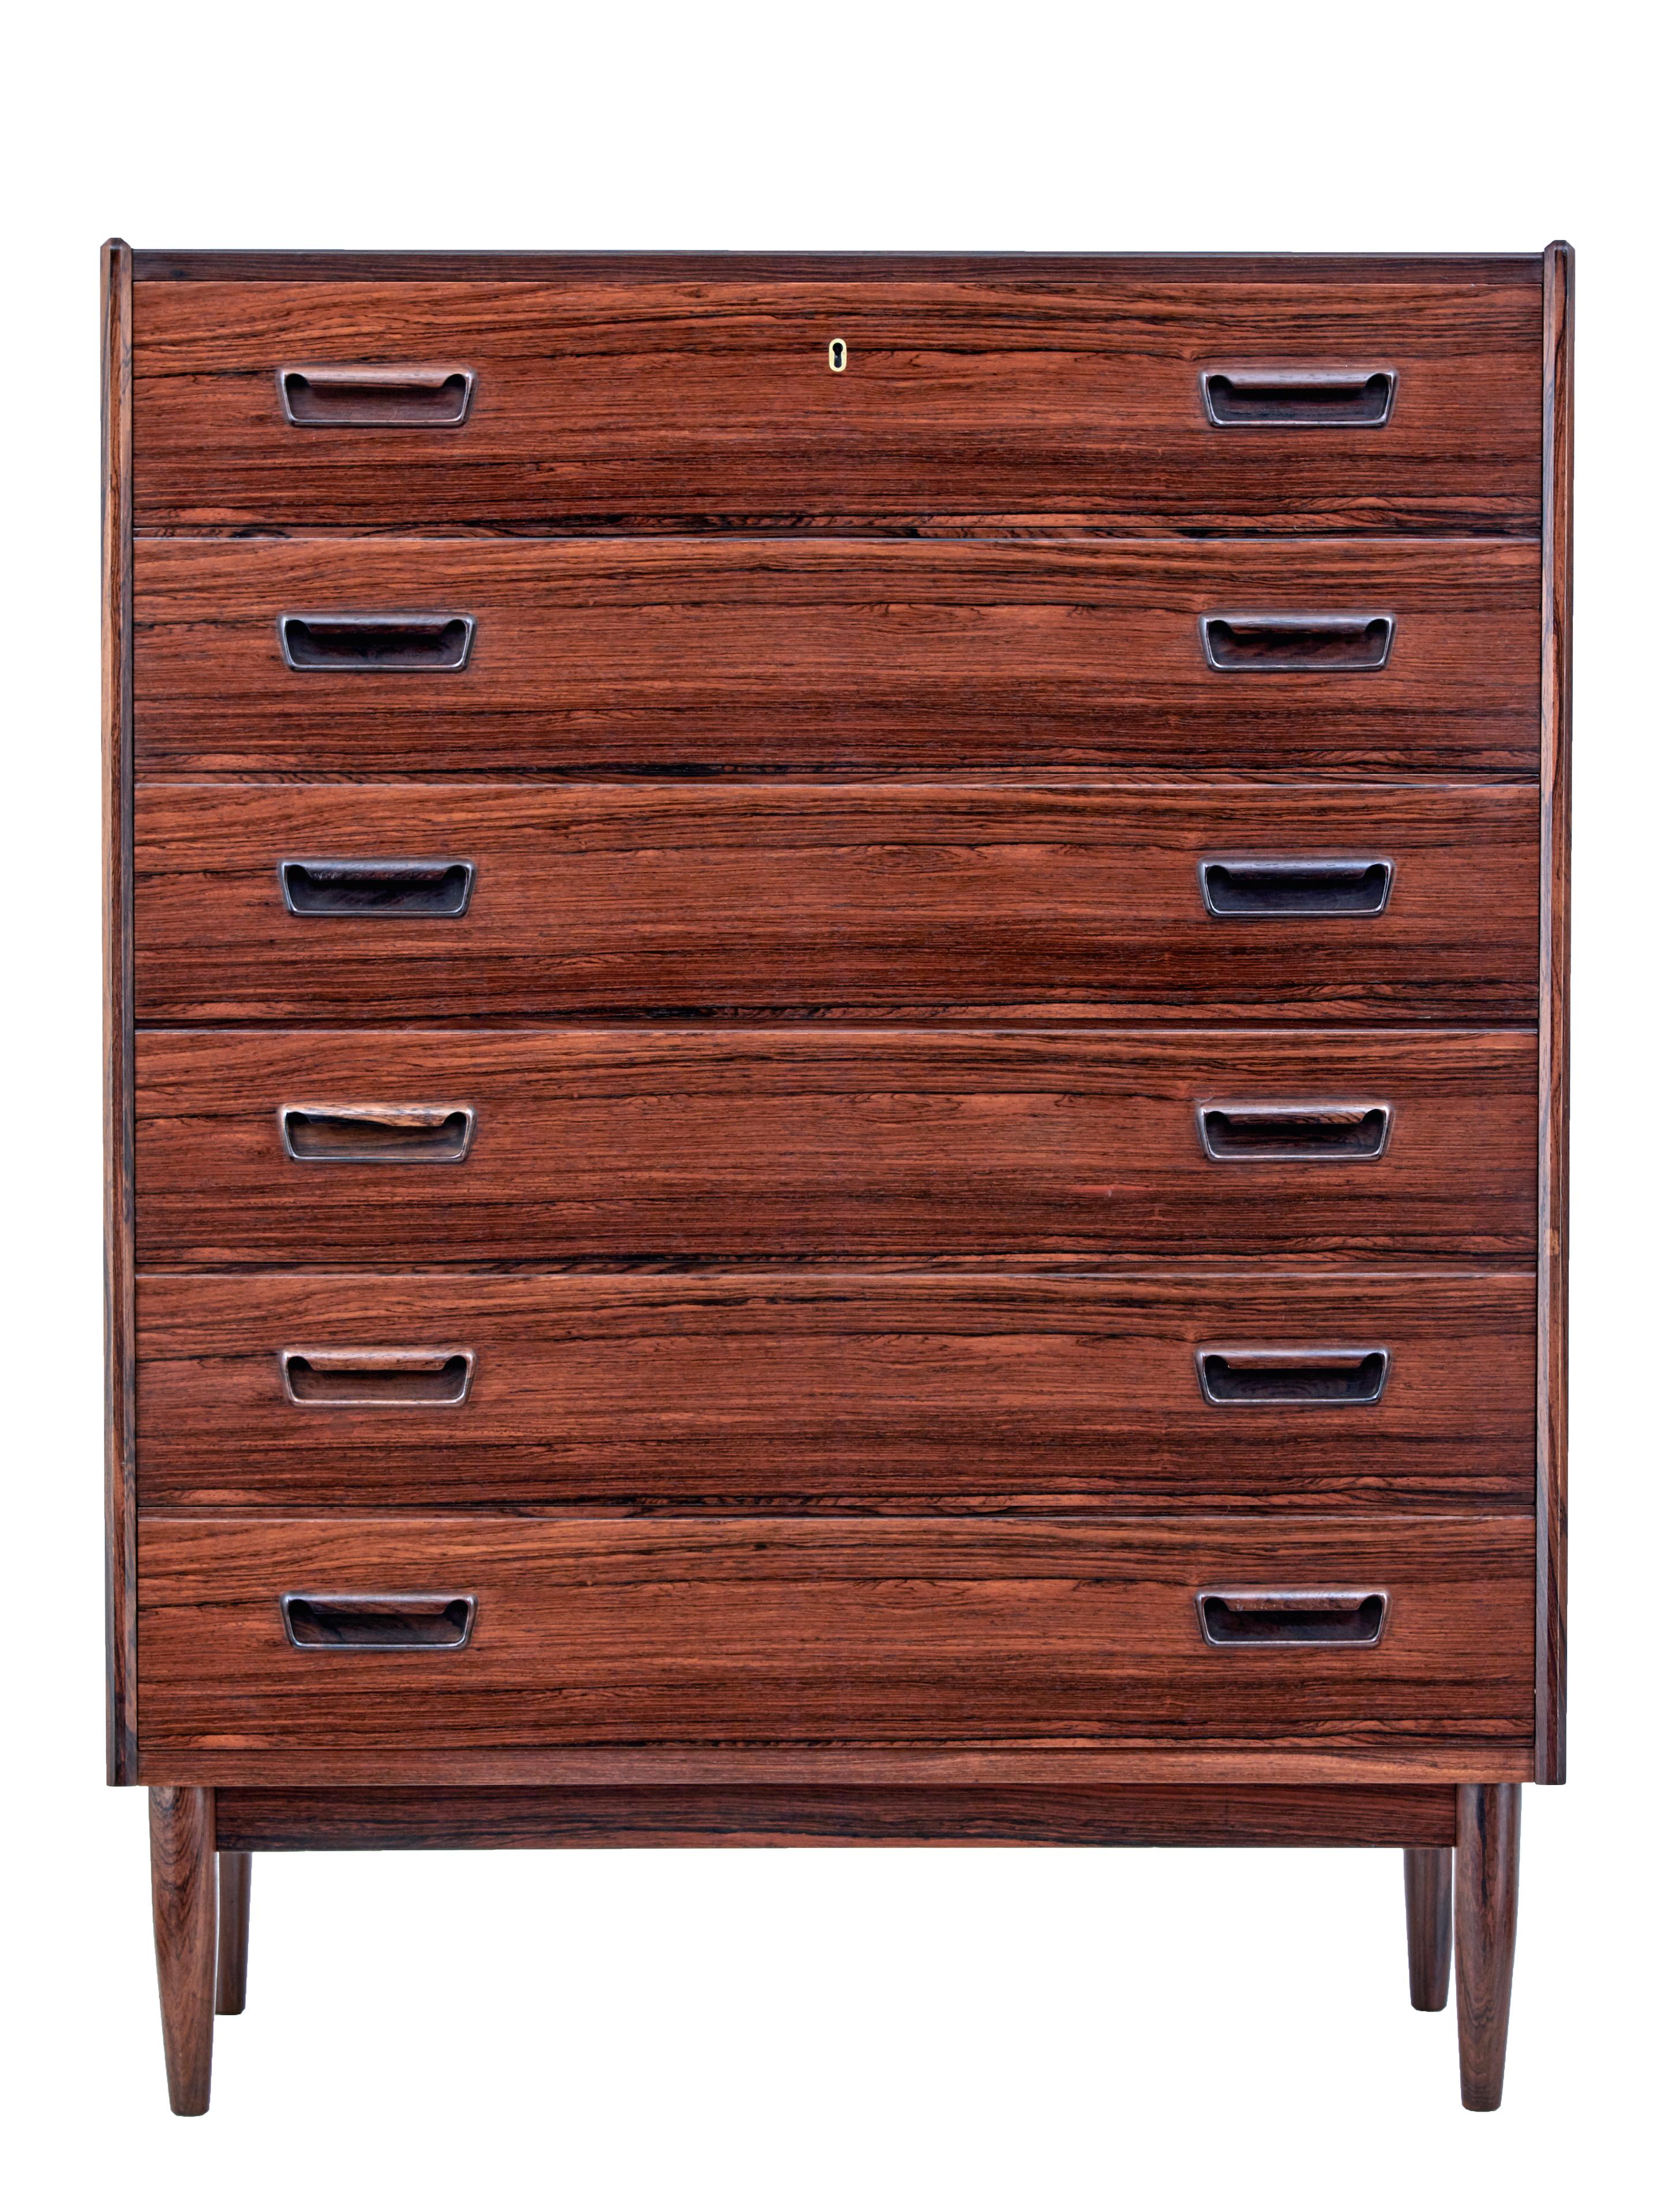 Mid-20th century palisander tall chest of drawers, circa 1960.

Good quality Scandinavian tall chest of drawers. 6 equal sized drawers with fitted solid handles.

Striking veneers used, with rich color. Standing on tapered legs.

Minor loss to